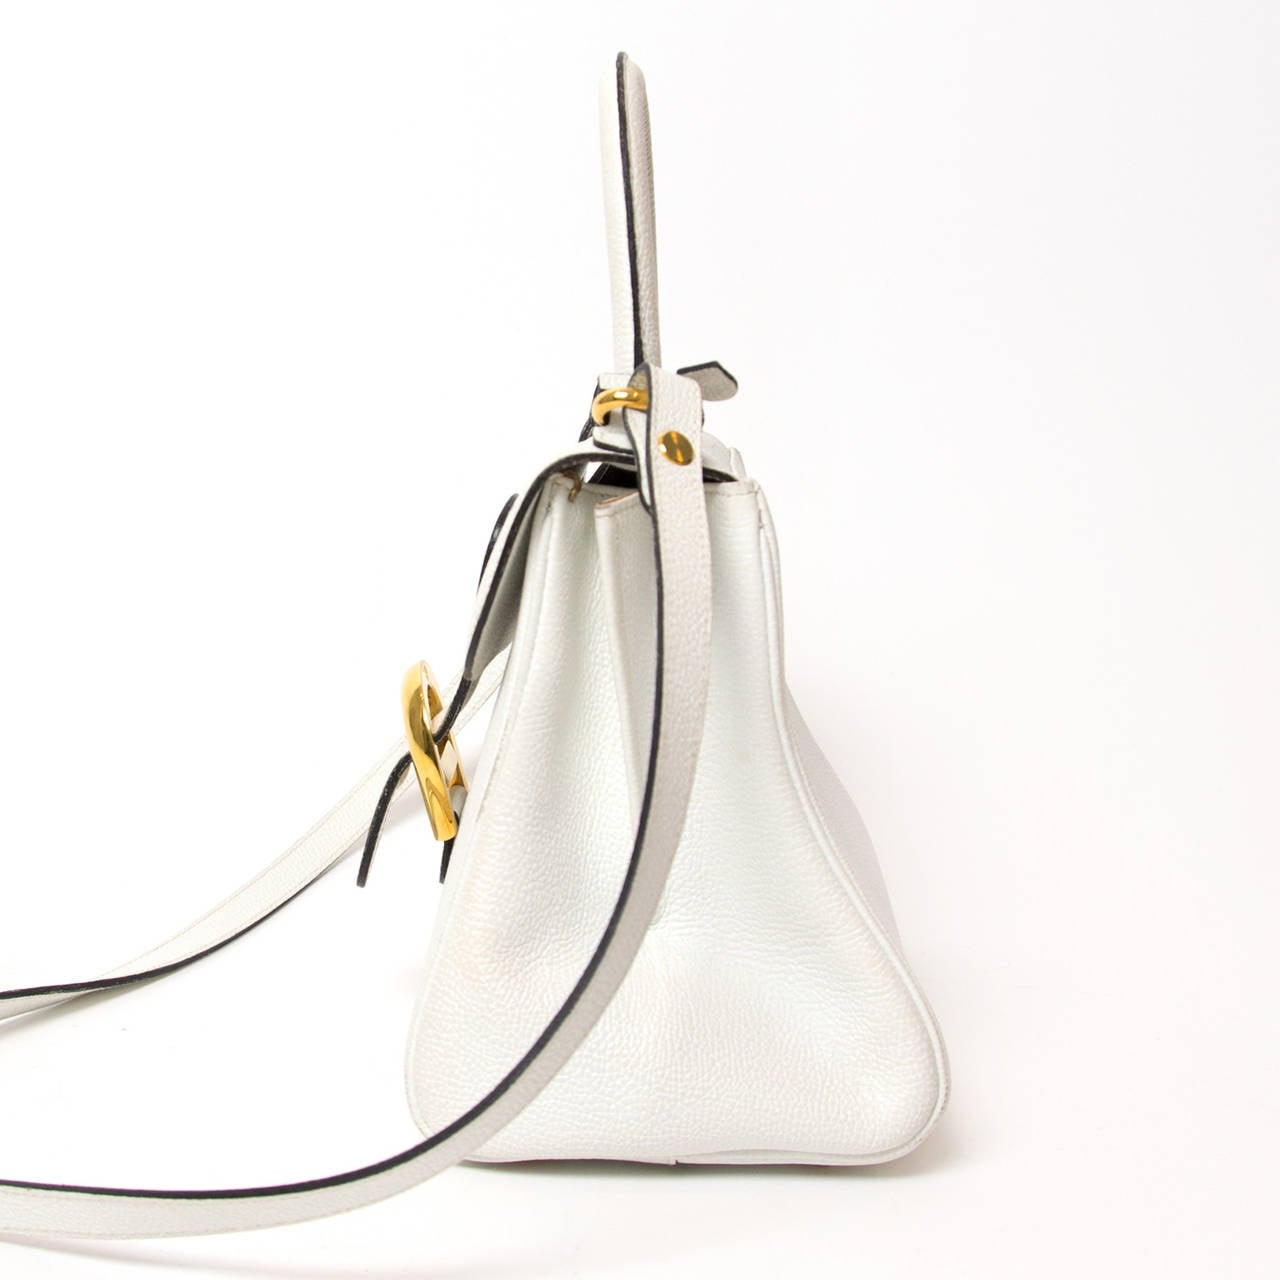 This Delvaux Brillant PM bag is a white grained calfskin top handle bag with attachable shoulder strap.